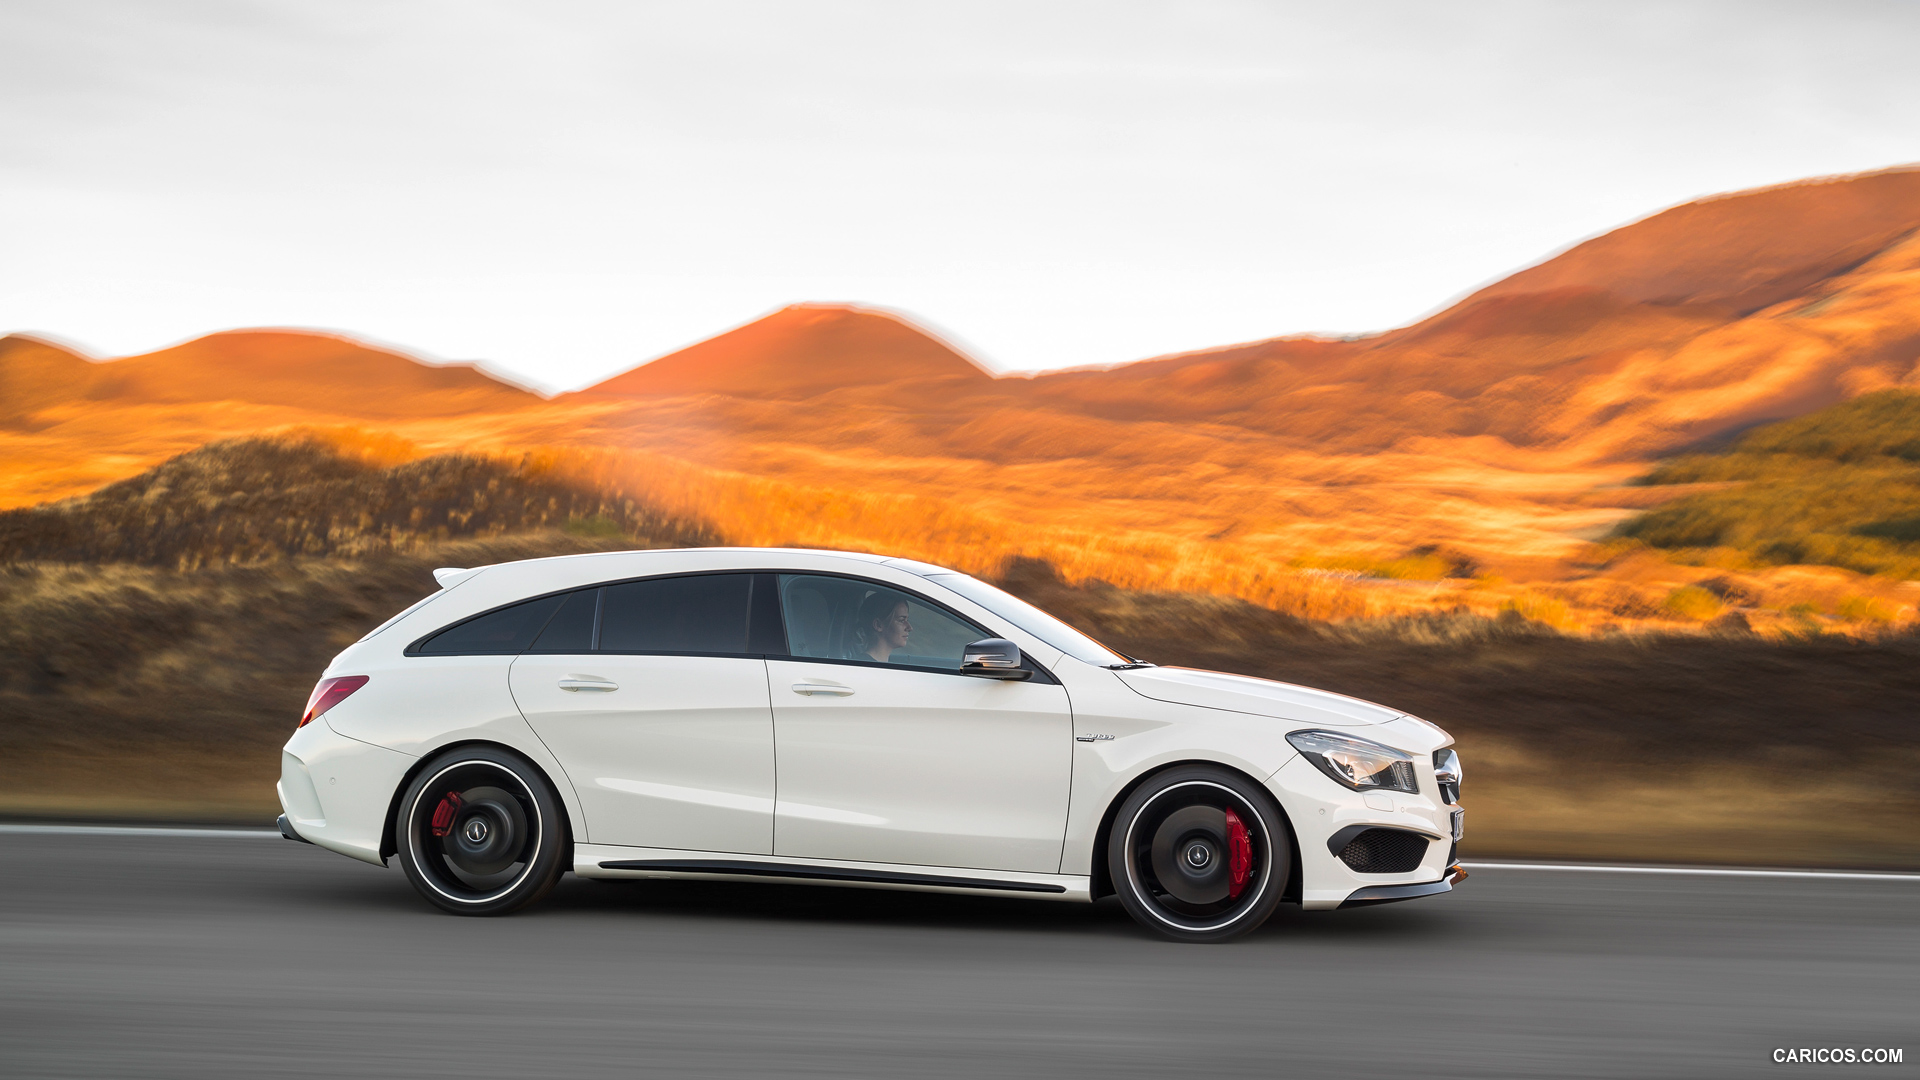 2015 Mercedes-Benz CLA 45 AMG Shooting Brake (Calcite White) - Side, #22 of 70